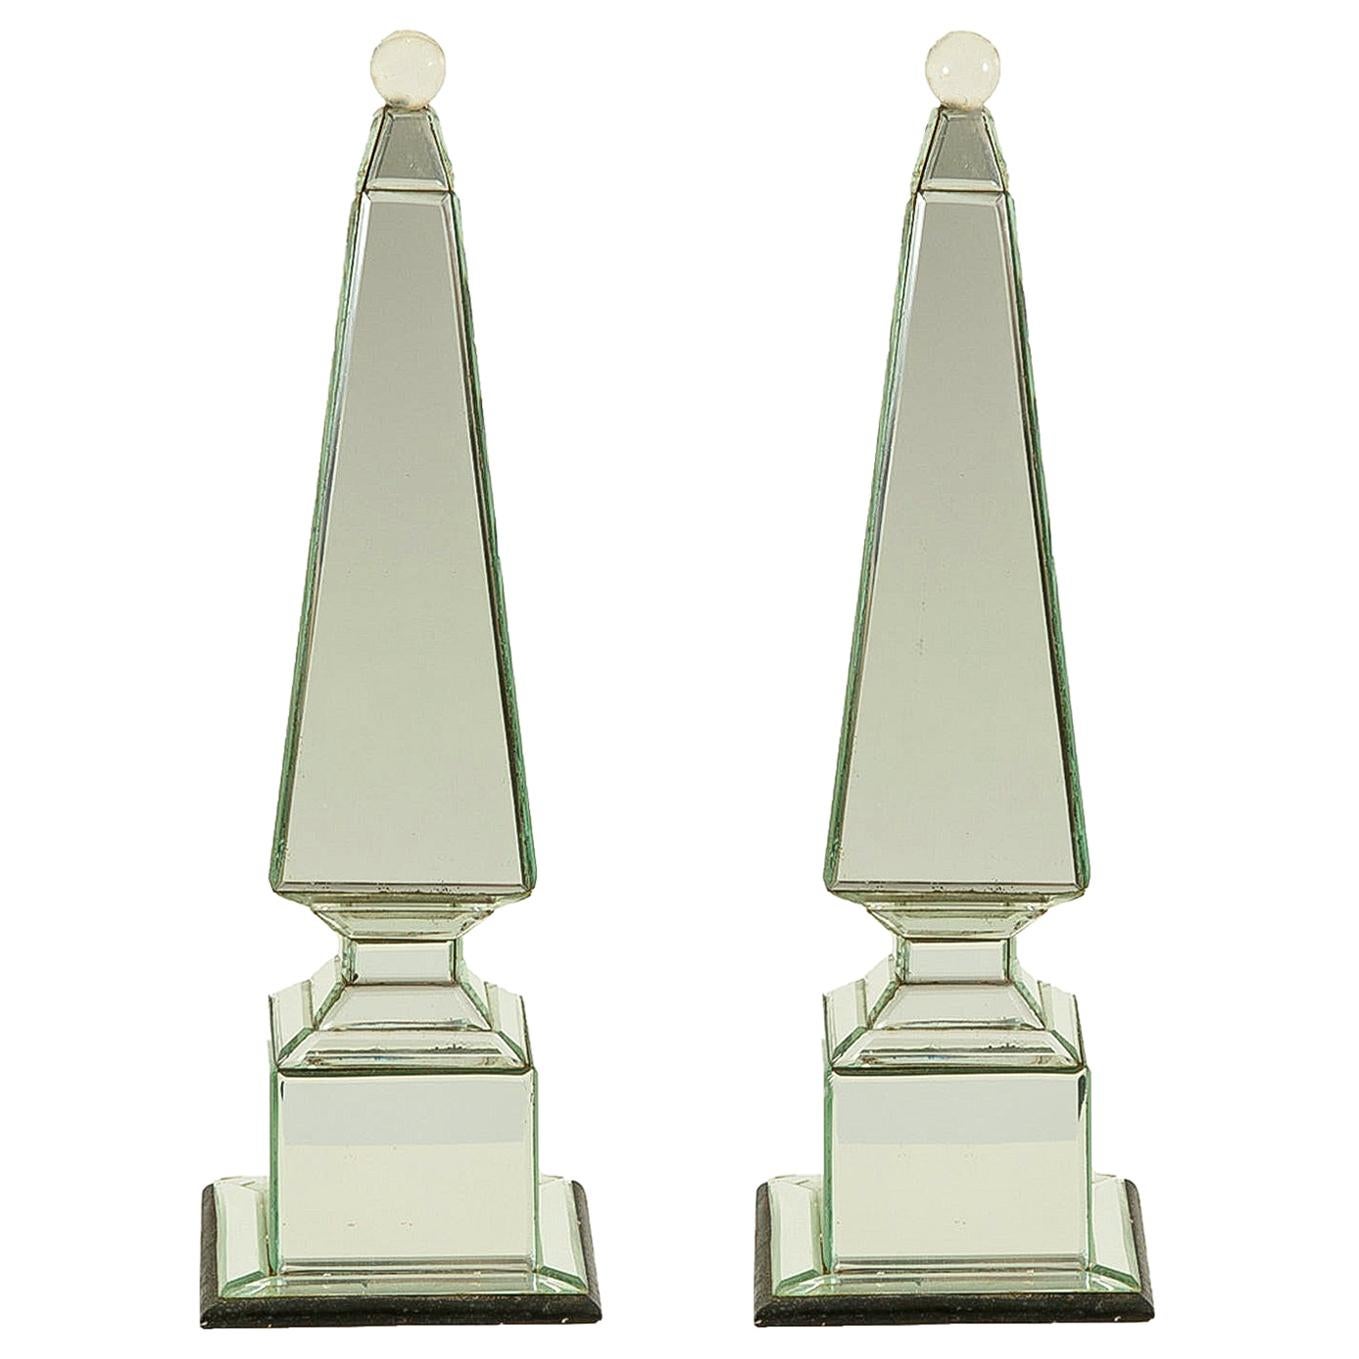 Serge Roche Mirrored Obelisk with Crystal Ball Finial For Sale